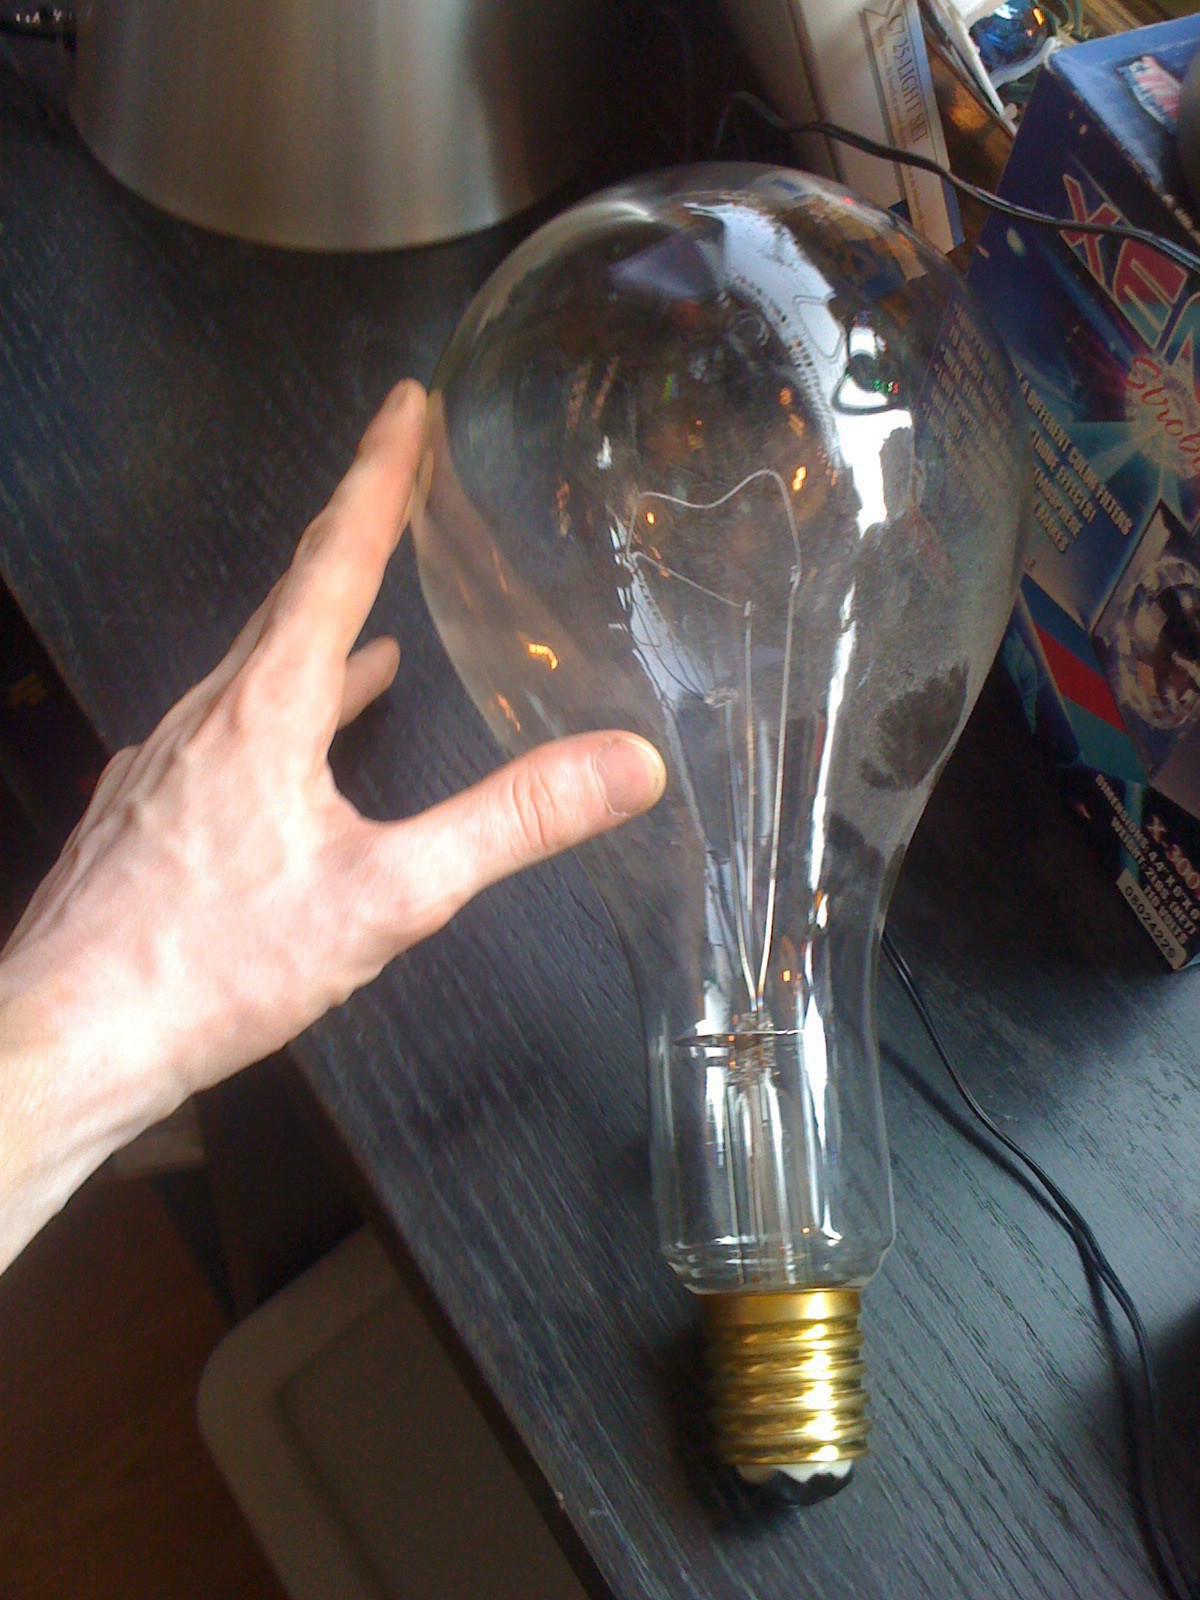 My hand next to a giant light bulb.